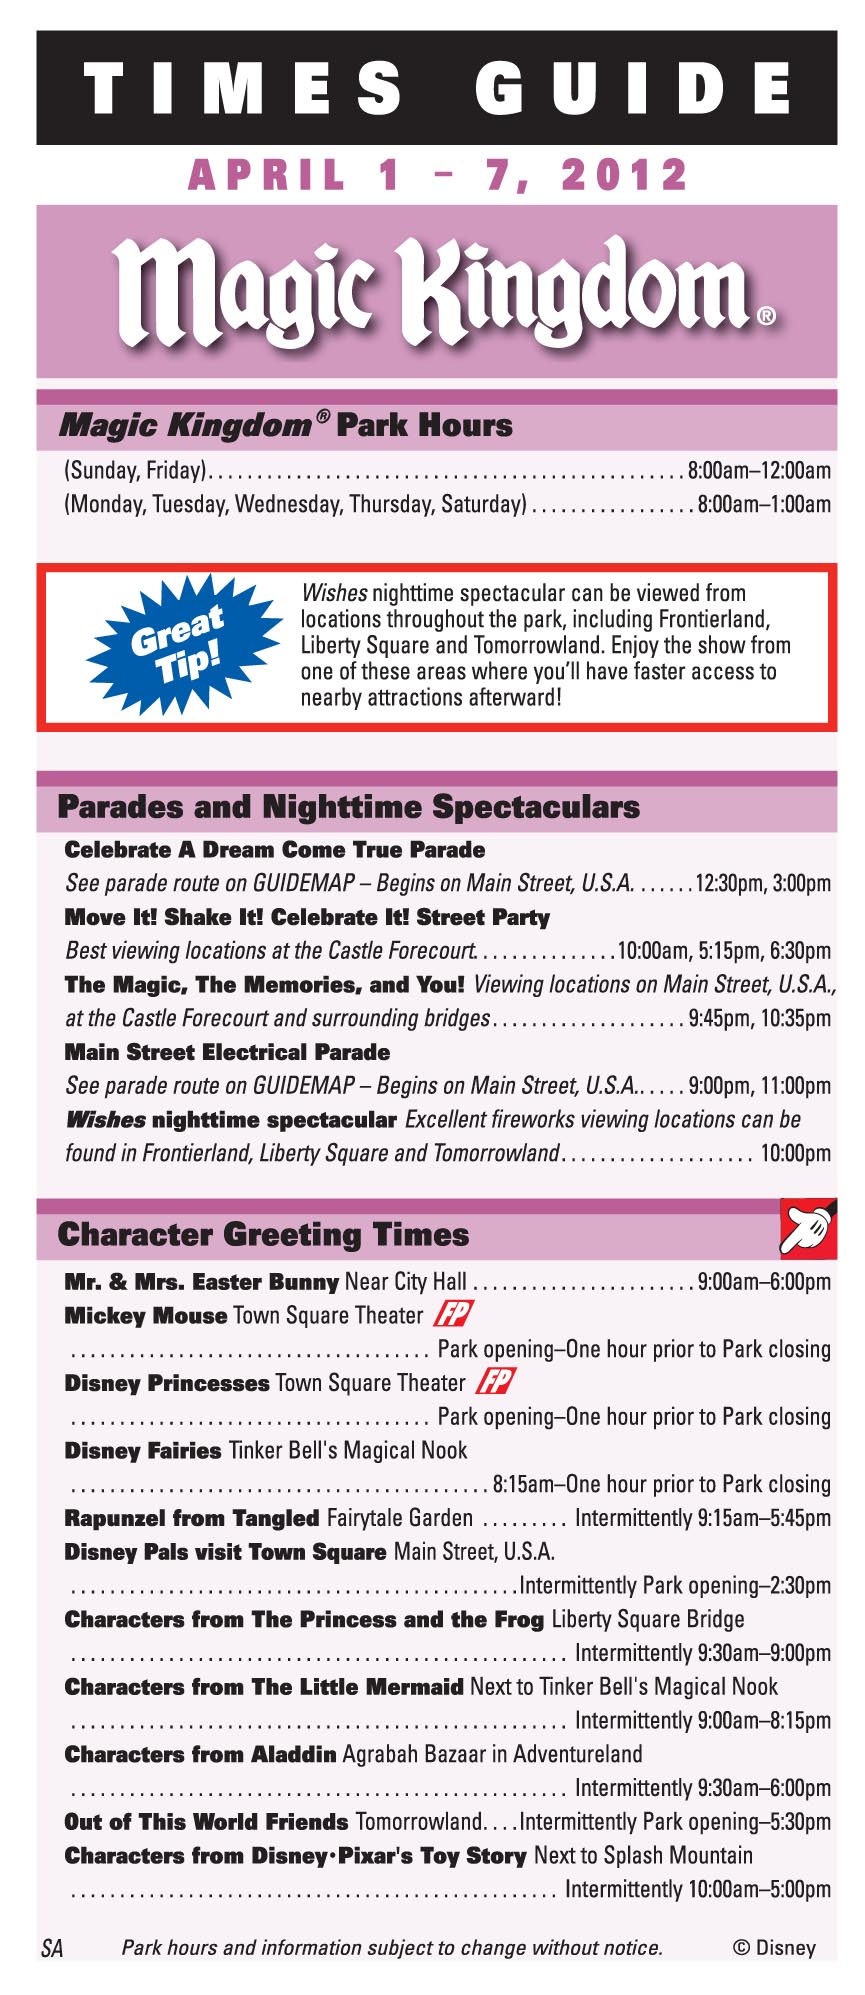 The Times Guide will give information about character greeting locations and hours. 